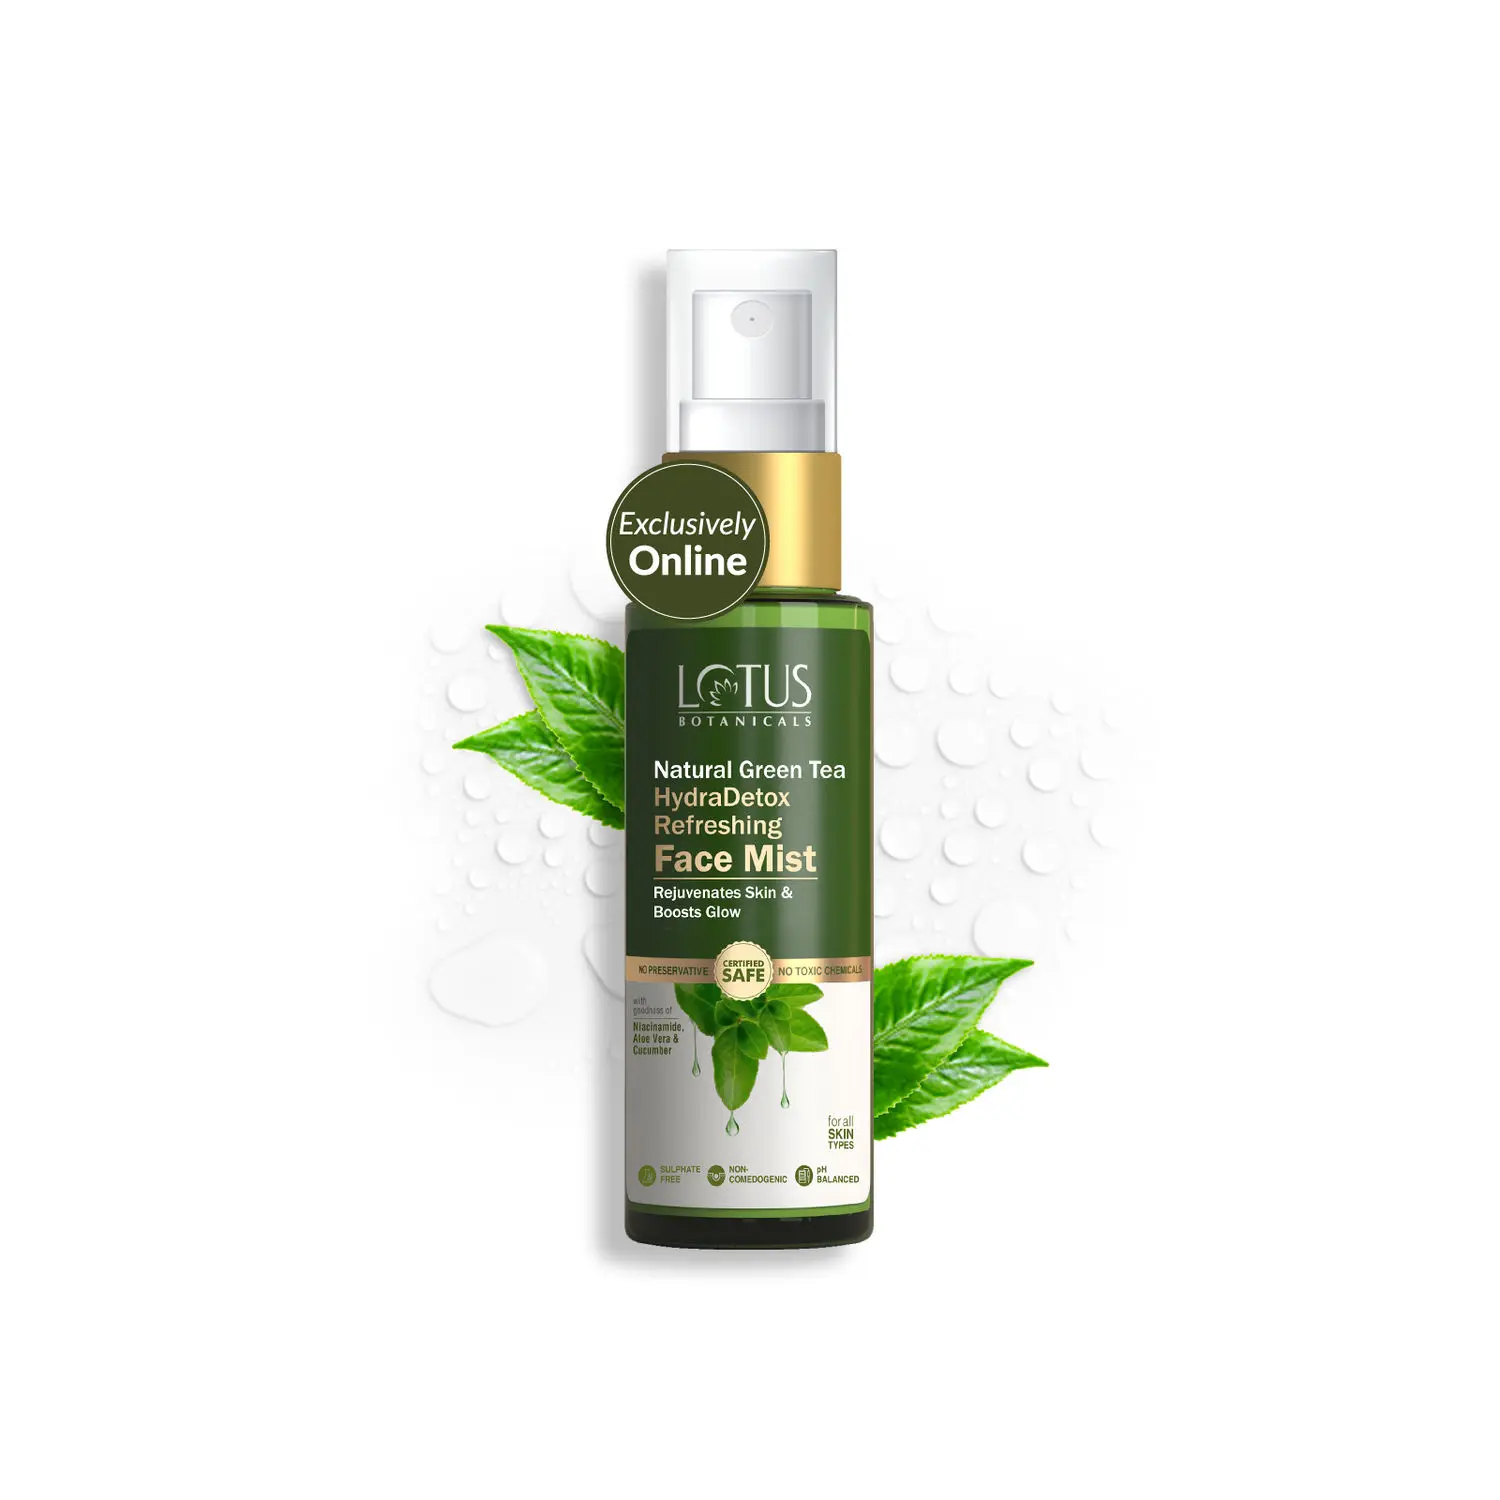 Lotus Botanicals Natural Green Tea HydraDetox Refreshing Face Mist | Rejuvenates & Refreshes Skin | Boosts Glow | Tightens Pores | Reduces Skin Inflammation | Prevents Acne and Pimples | Preservative Free | For All Skin Types | 50g